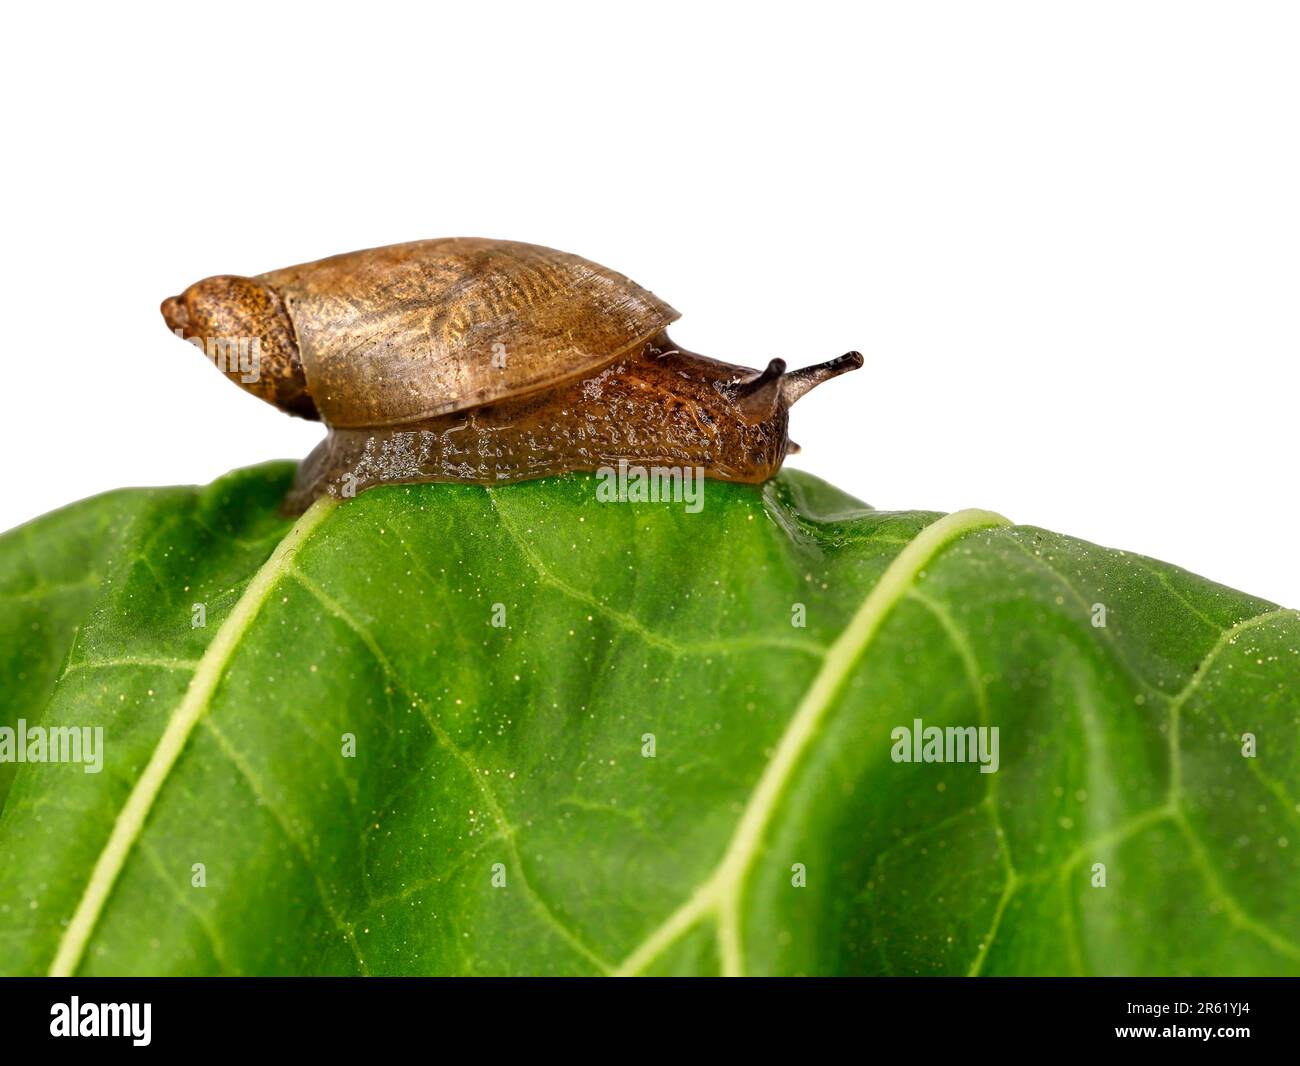 Common amber snail, Succinea putris, on a lettuce leaf, isolated on white background with copy space Stock Photo